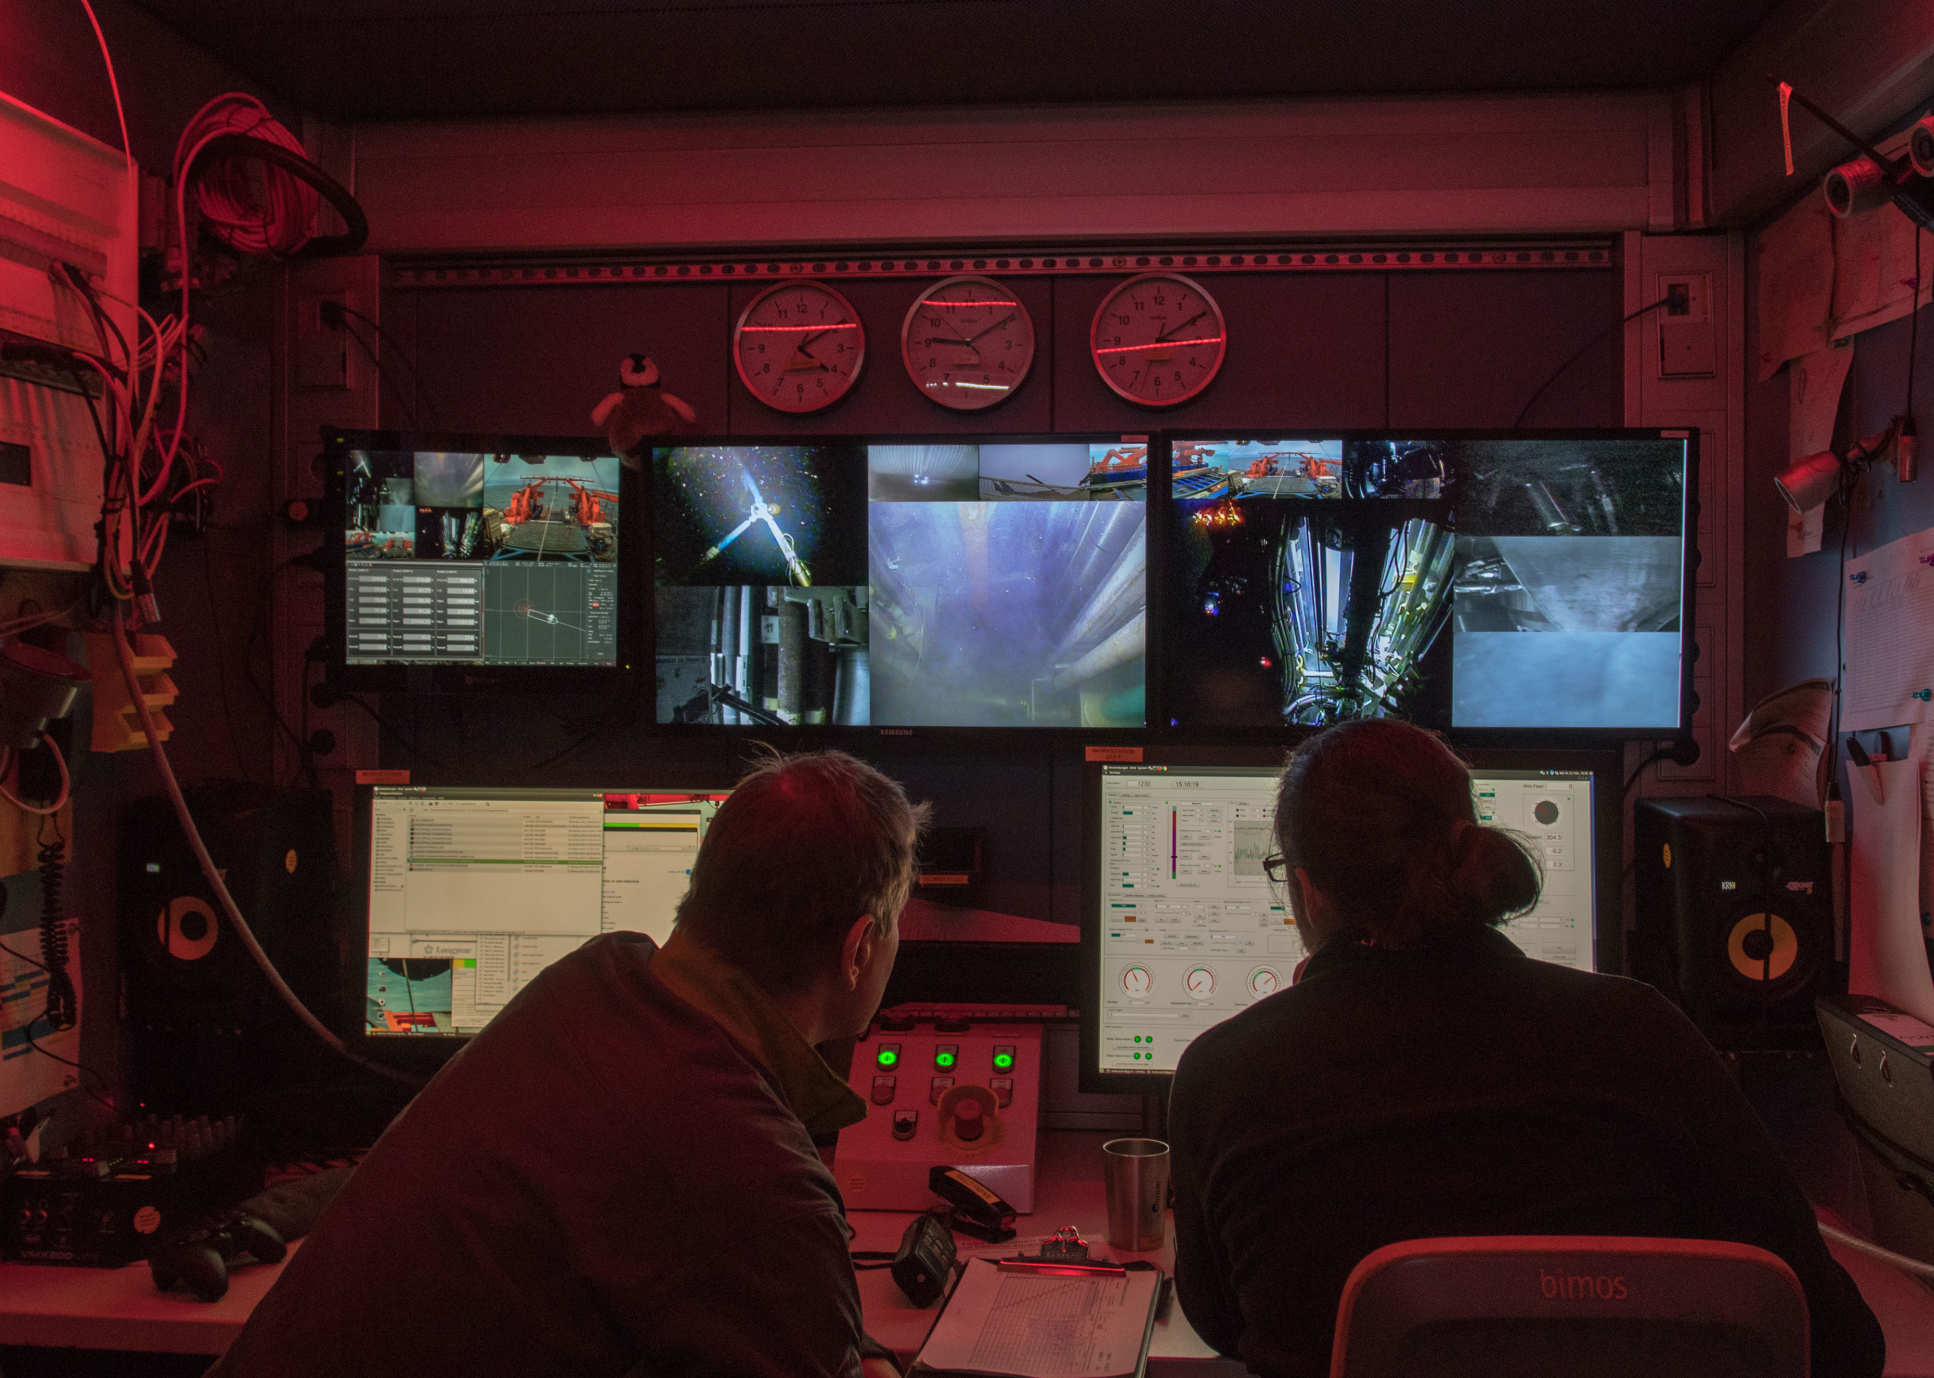 Two people in a dark room in front of screens showing ocean drilling